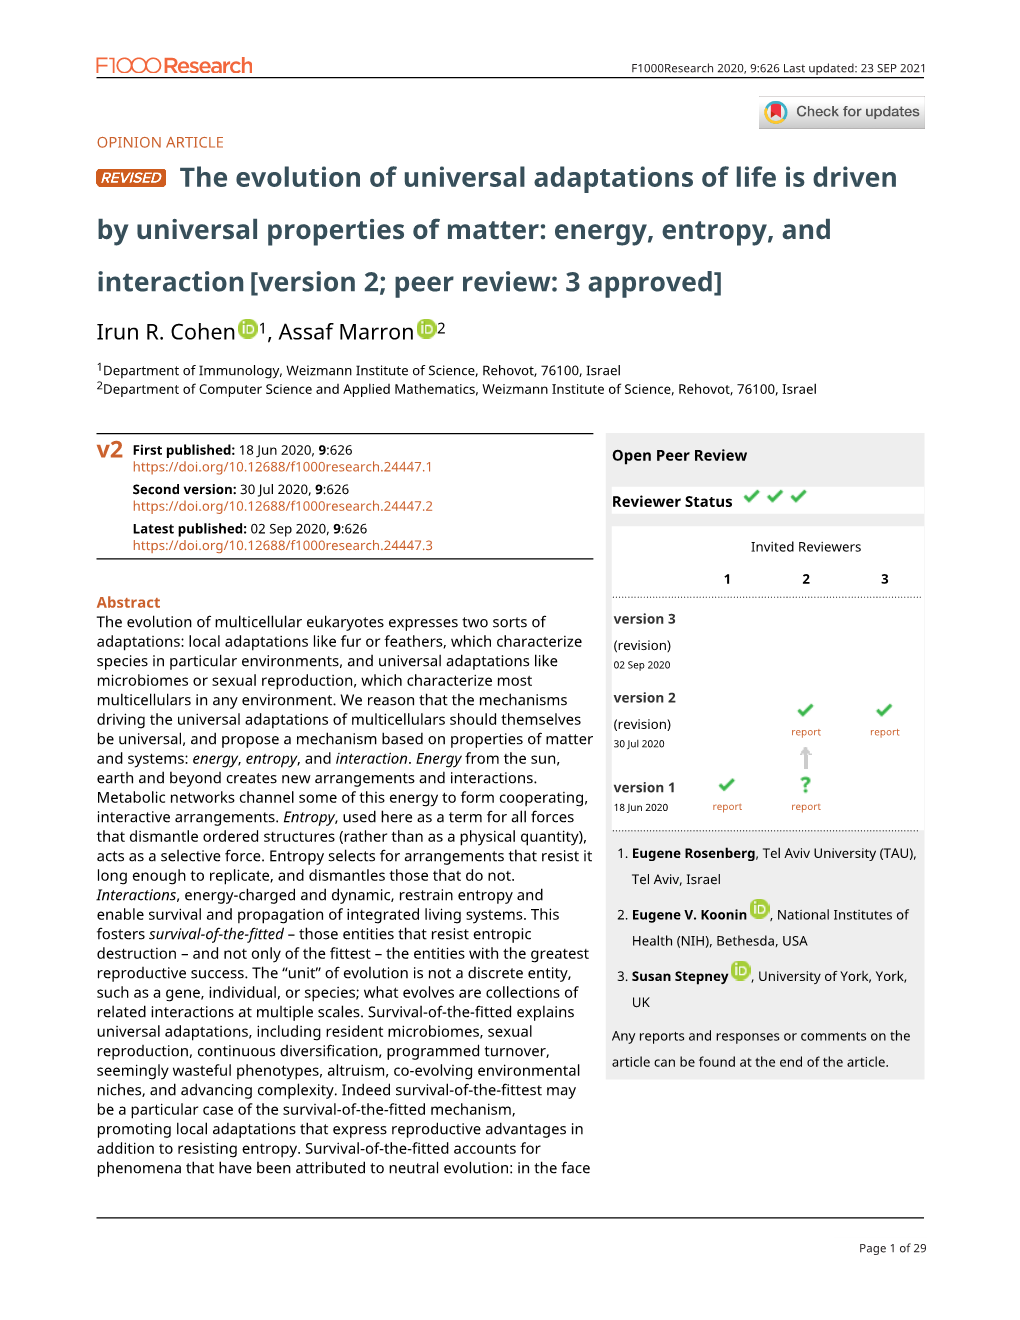 The Evolution of Universal Adaptations of Life Is Driven by Universal Properties of Matter: Energy, Entropy, and Interaction [Version 2; Peer Review: 3 Approved]